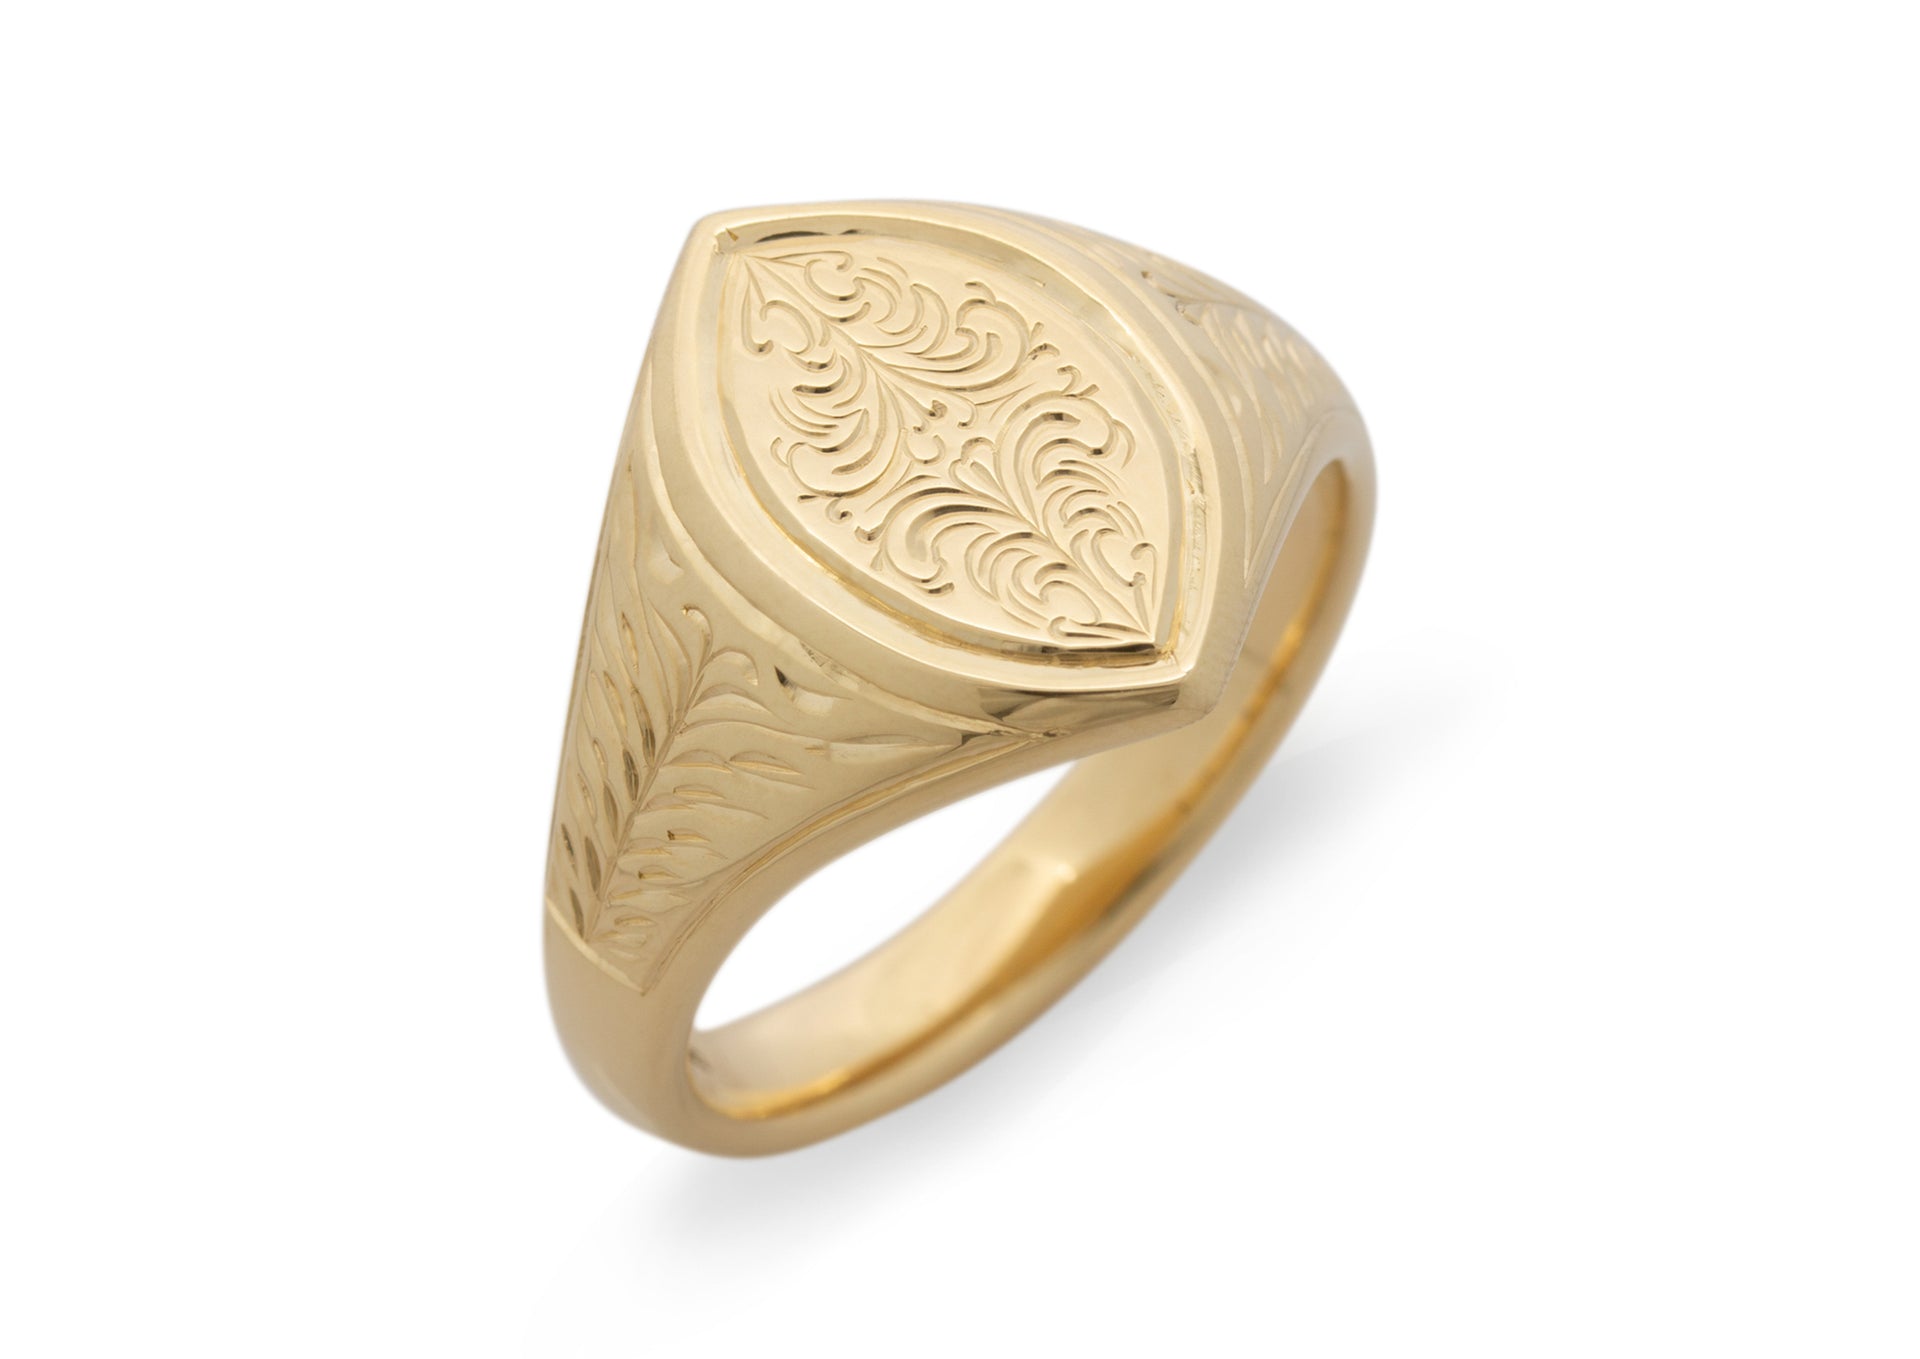 Navette Hand Engraved Signet Ring, Yellow Gold